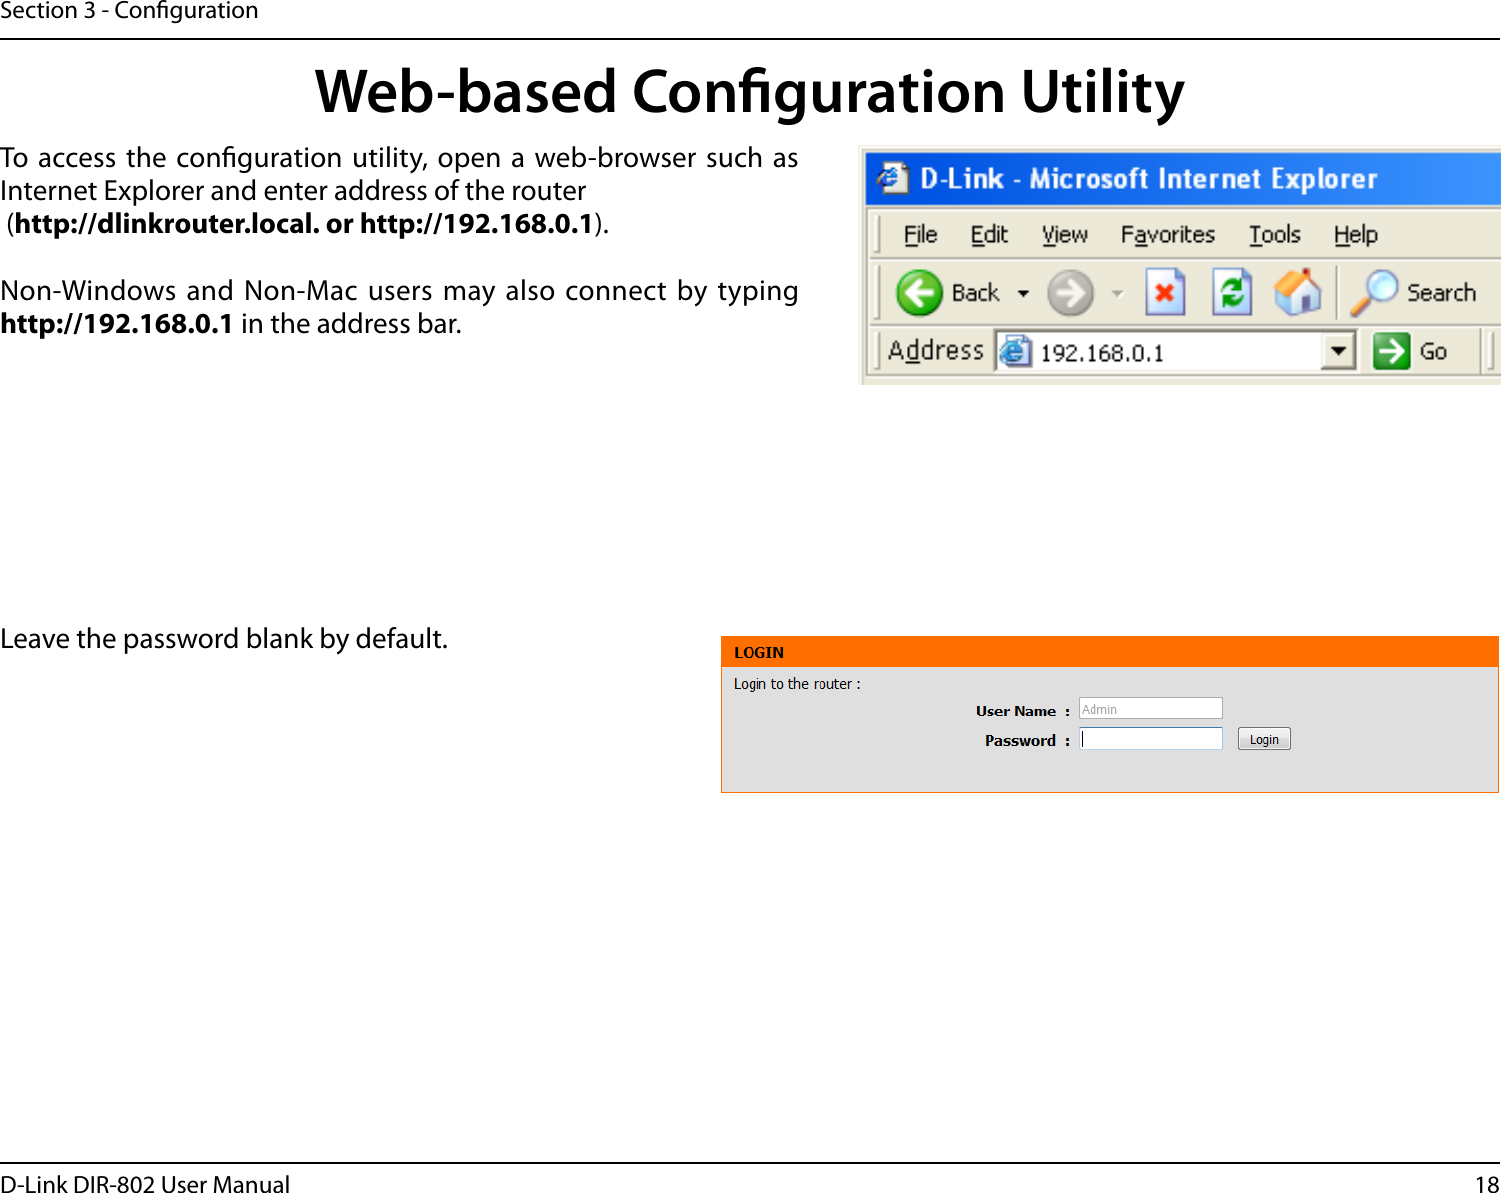 18D-Link DIR-802 User ManualSection 3 - CongurationWeb-based Conguration UtilityLeave the password blank by default.To  access the conguration utility, open a web-browser such as Internet Explorer and enter address of the router (http://dlinkrouter.local. or http://192.168.0.1).Non-Windows and  Non-Mac users may also  connect by typing http://192.168.0.1 in the address bar.